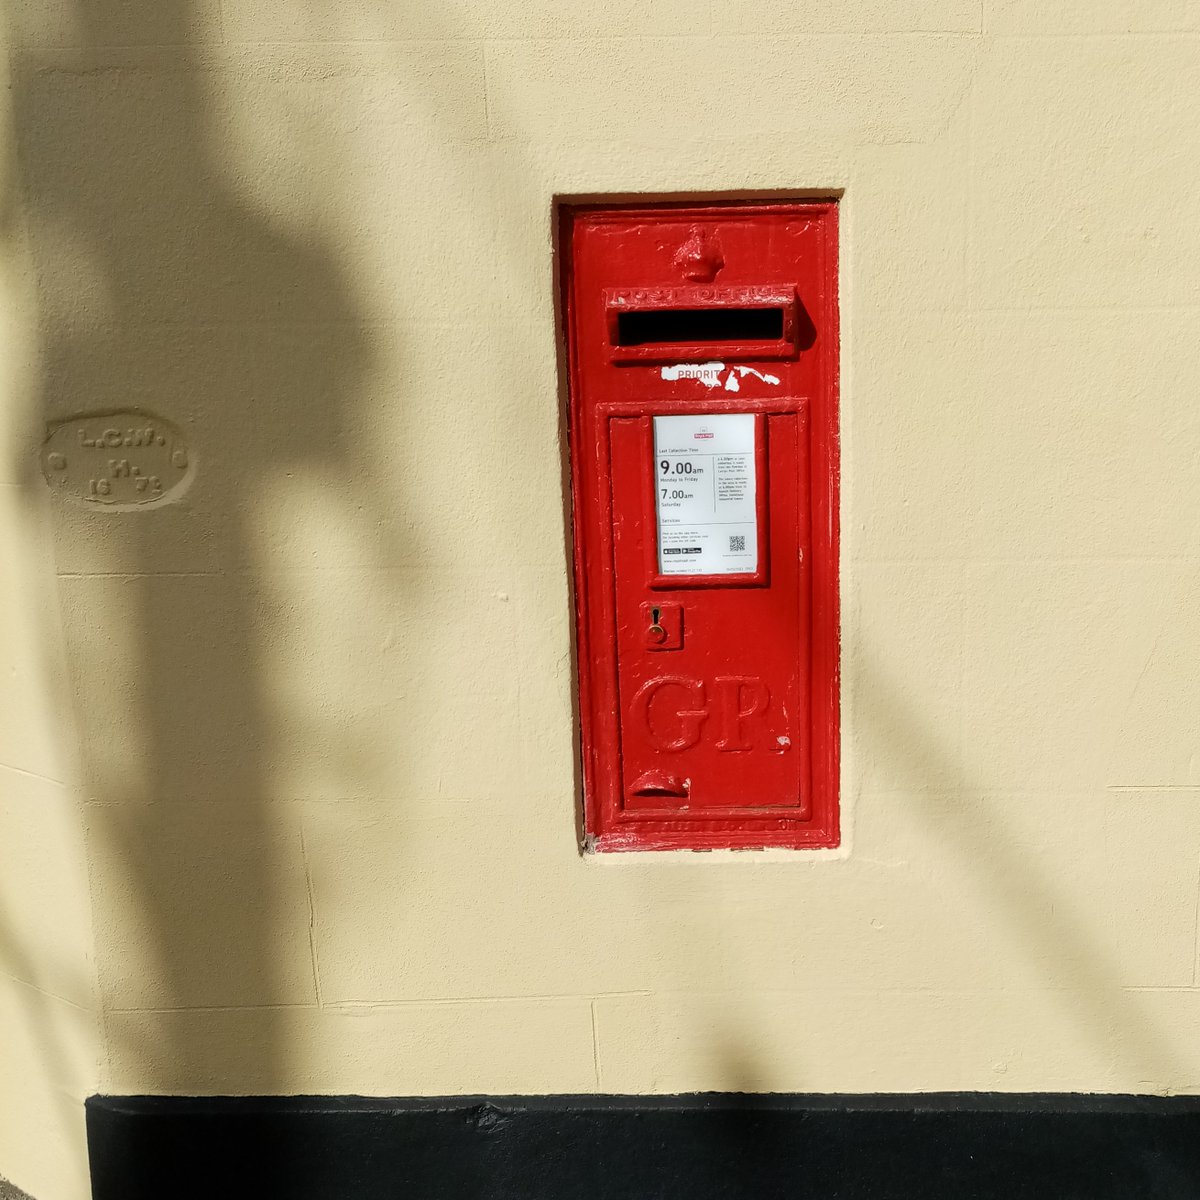 A recent GV find in sunny Lostwithiel. No idea what the adjacent embossing on the wall refers to.
#postboxsaturday